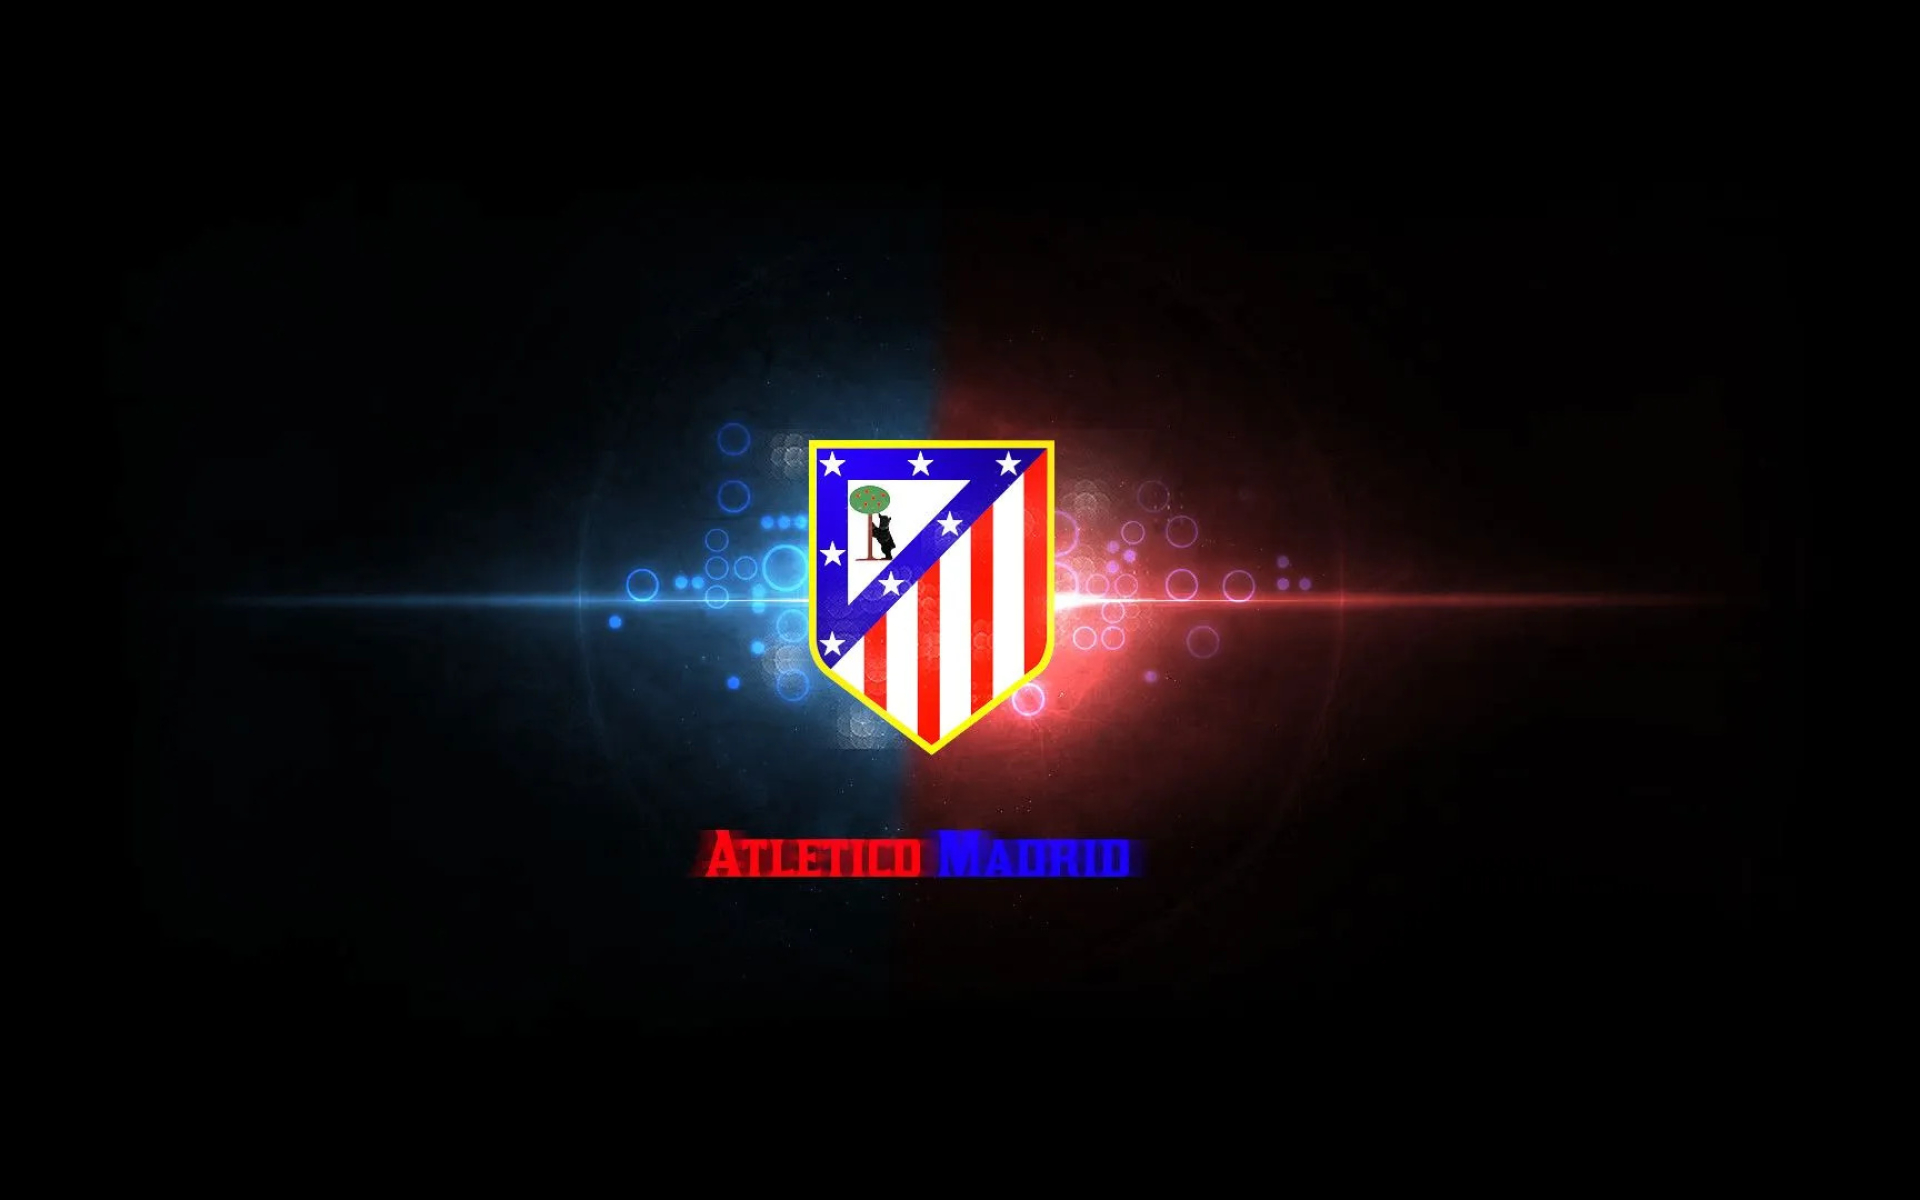 Atletico Madrid: Felipe VI, the king of Spain, has been the honorary president of the club since 2003. 1920x1200 HD Background.